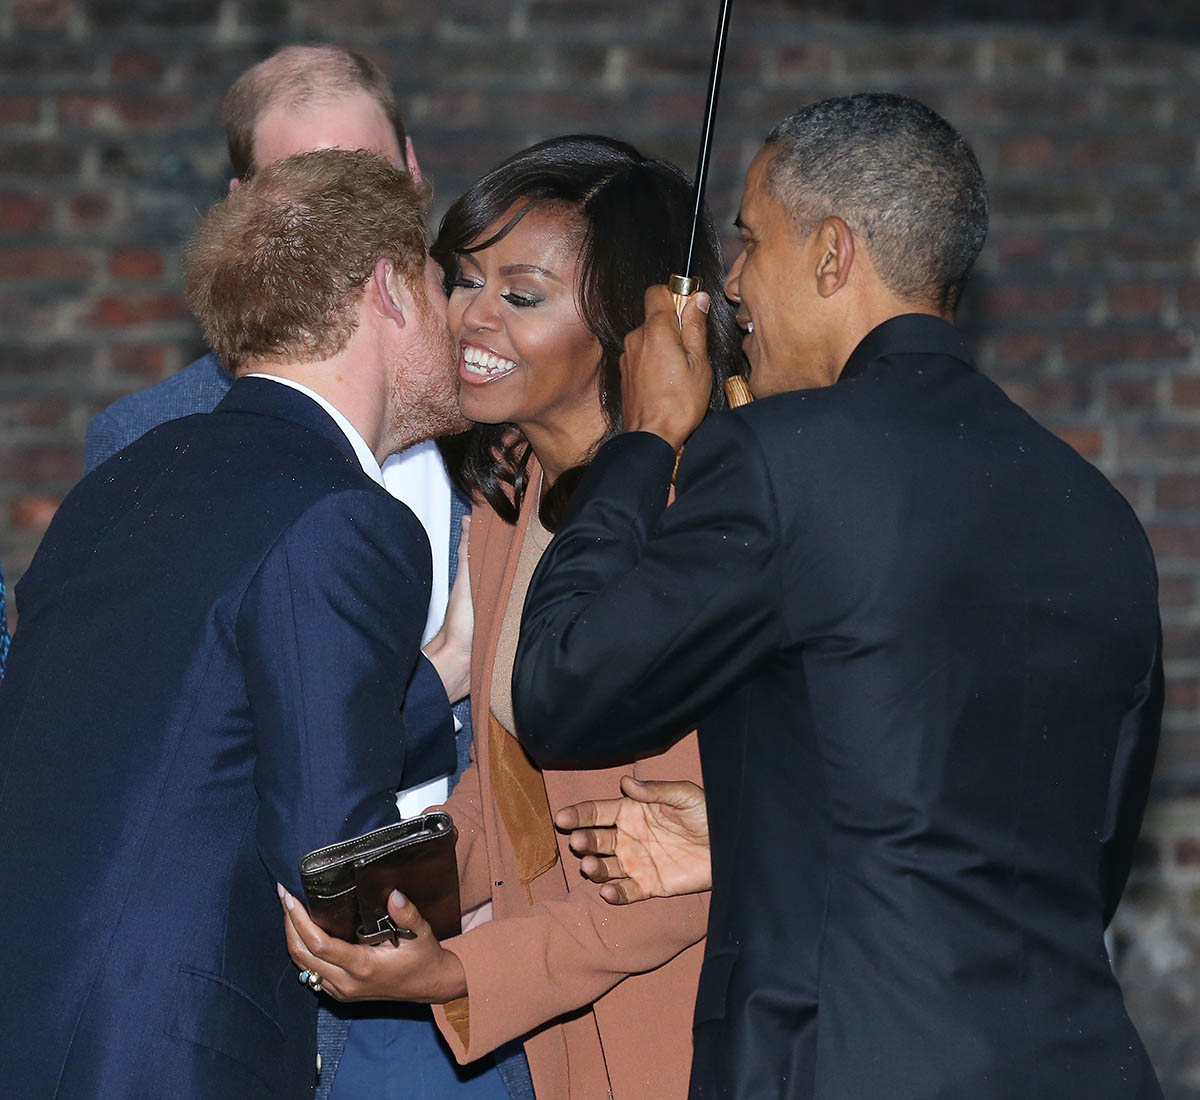 The Obamas Dine At Kensington Palace with Kate Middleton, Prince William and Prince Harry